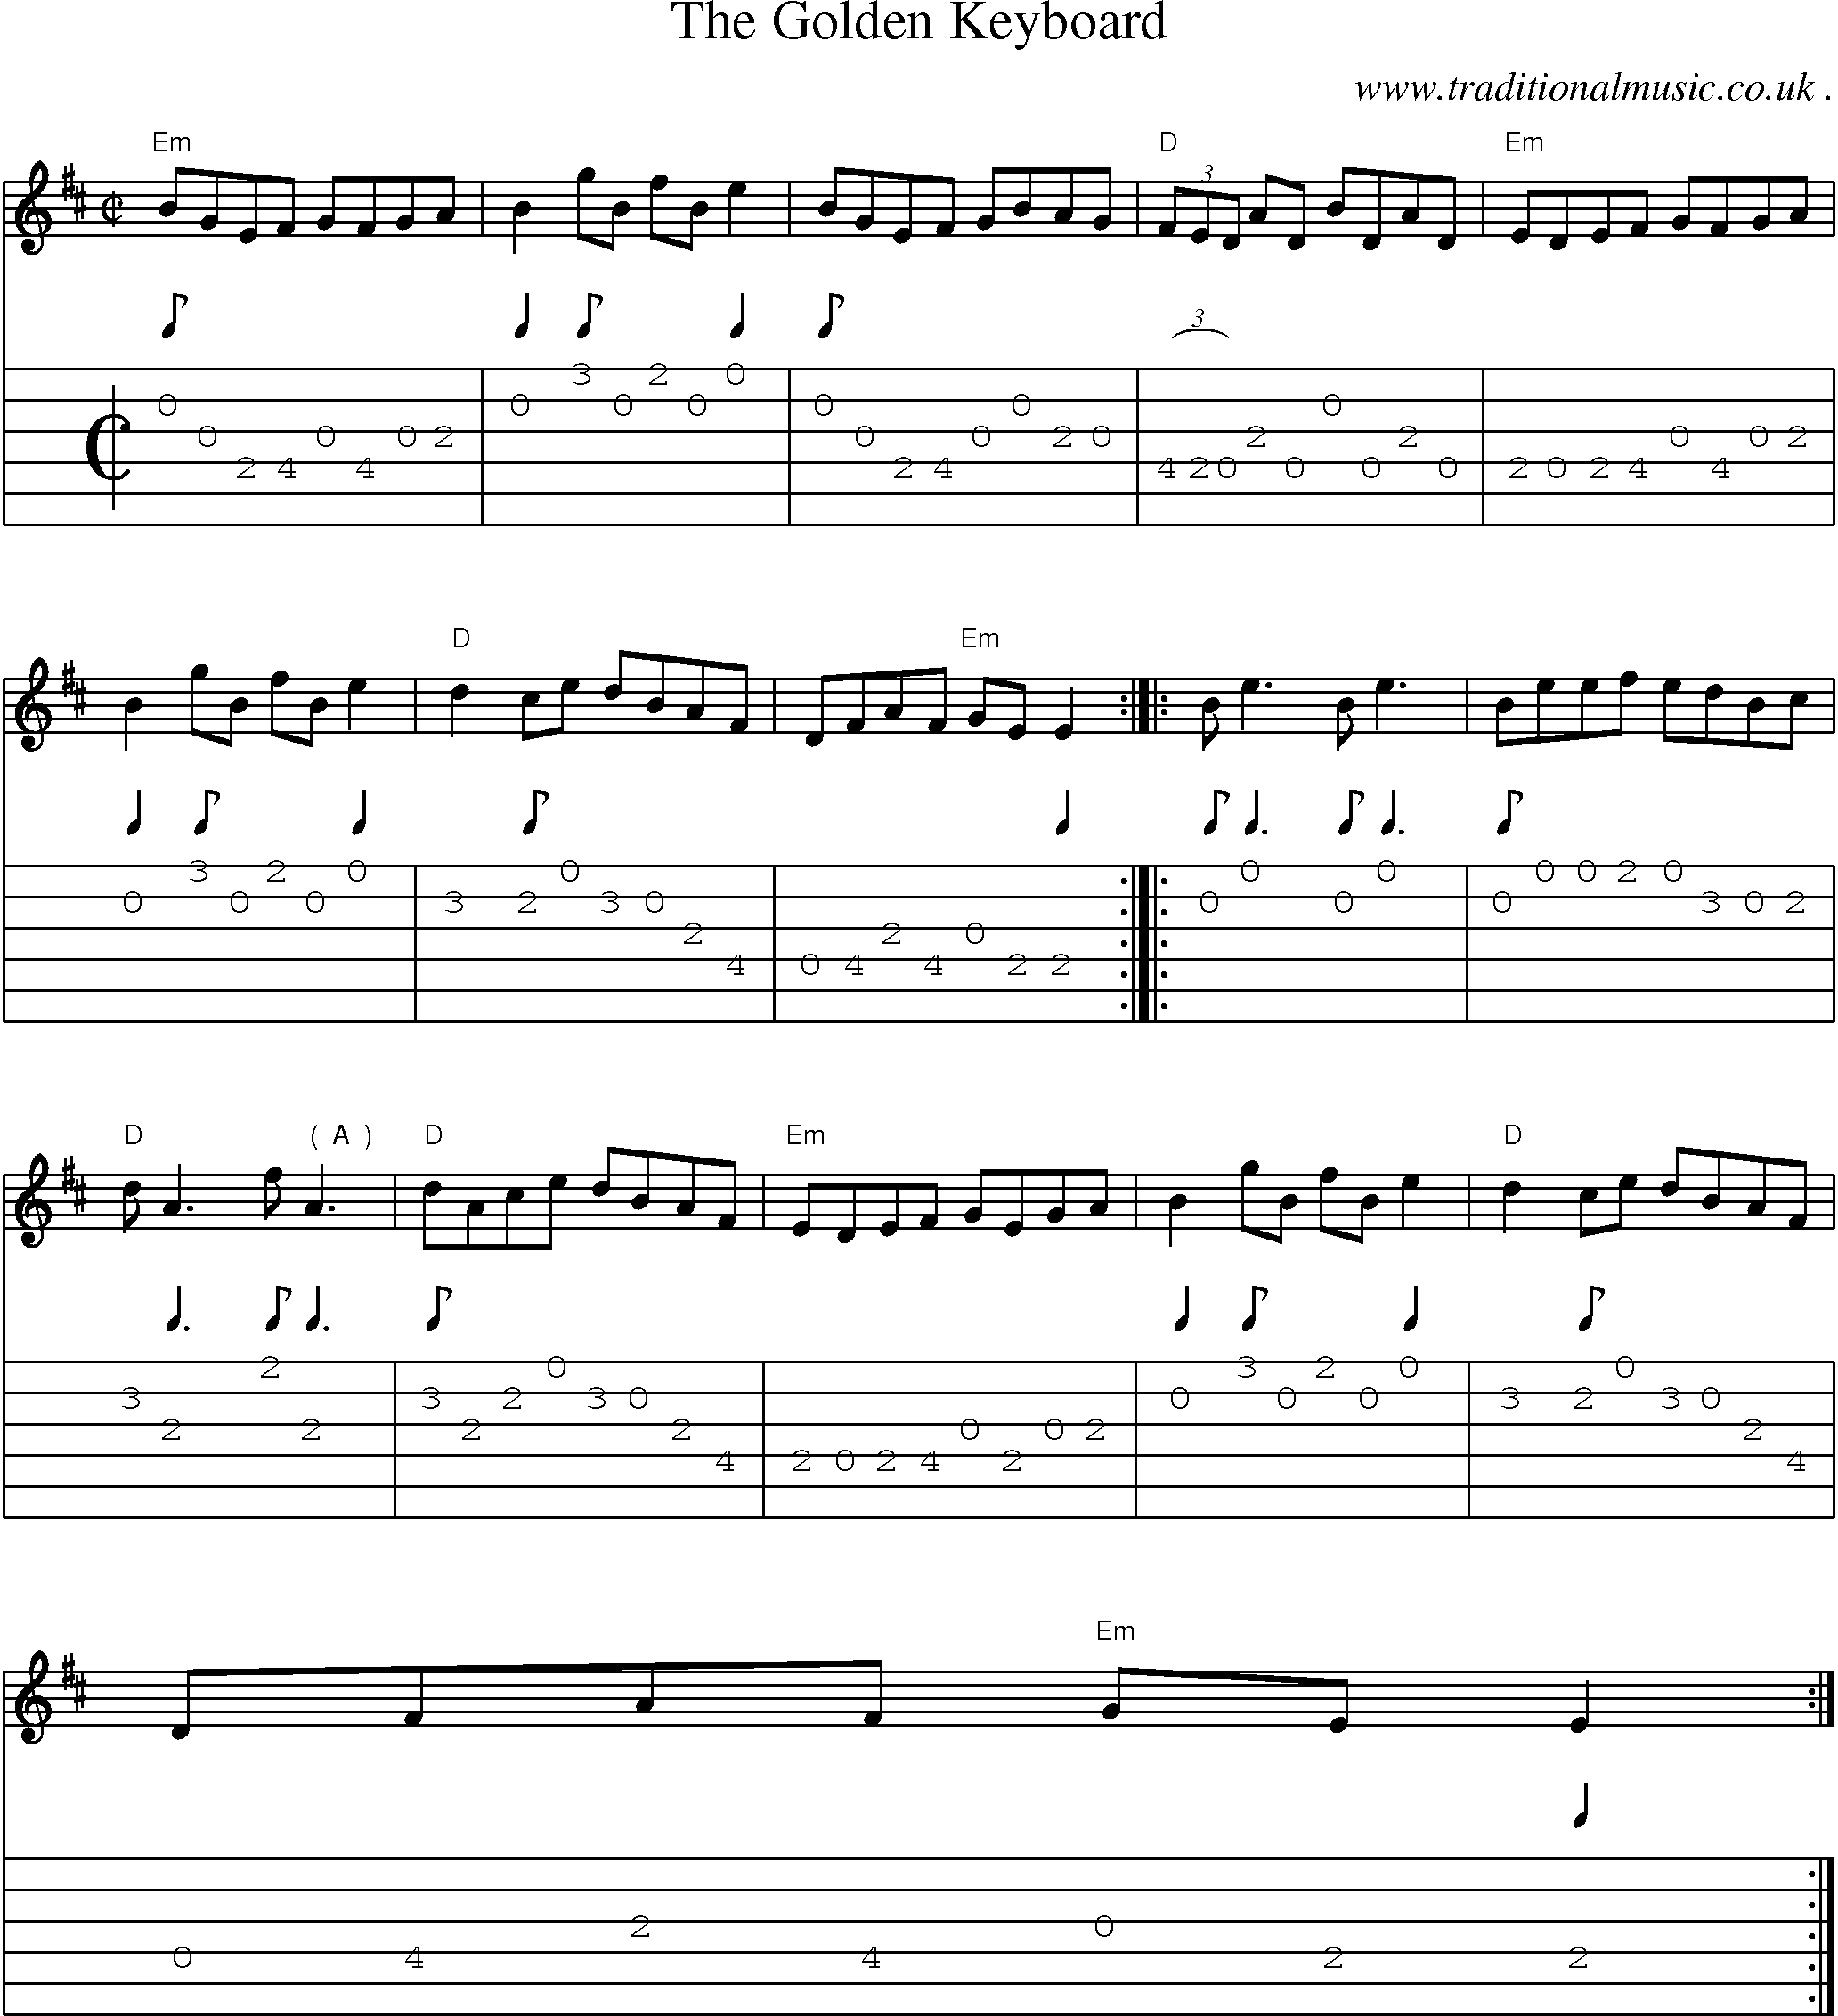 Music Score and Guitar Tabs for The Golden Keyboard